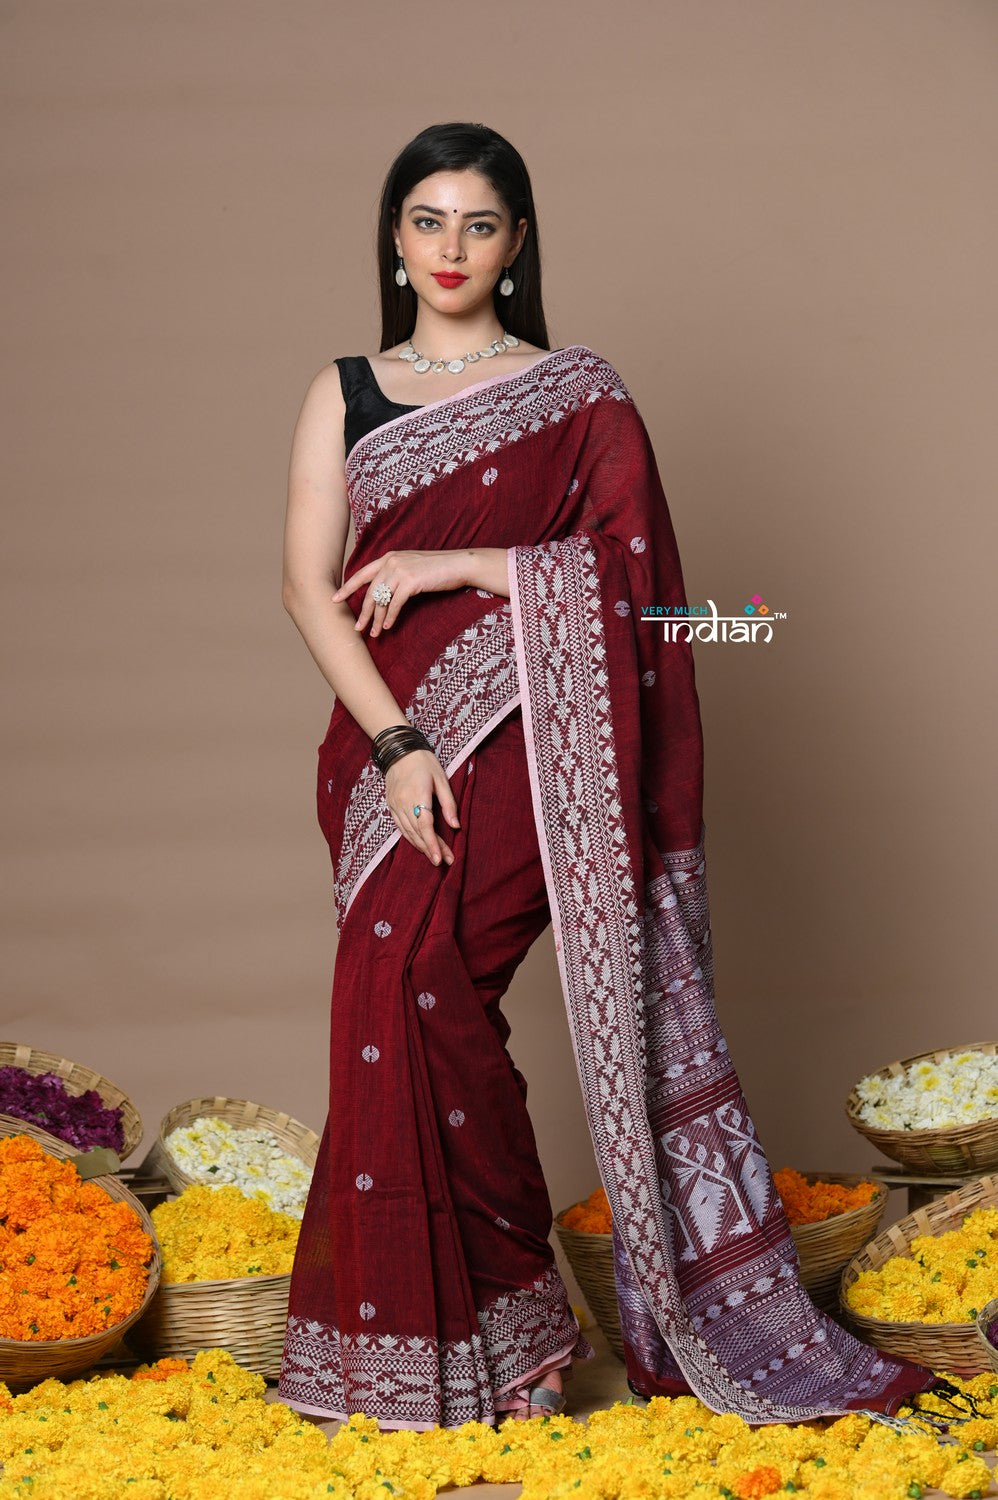 Very Much Indian Rajsi - Handloom Pure Cotton Saree with Hand-embroidered Symmetric Border - Maroon - Distacart